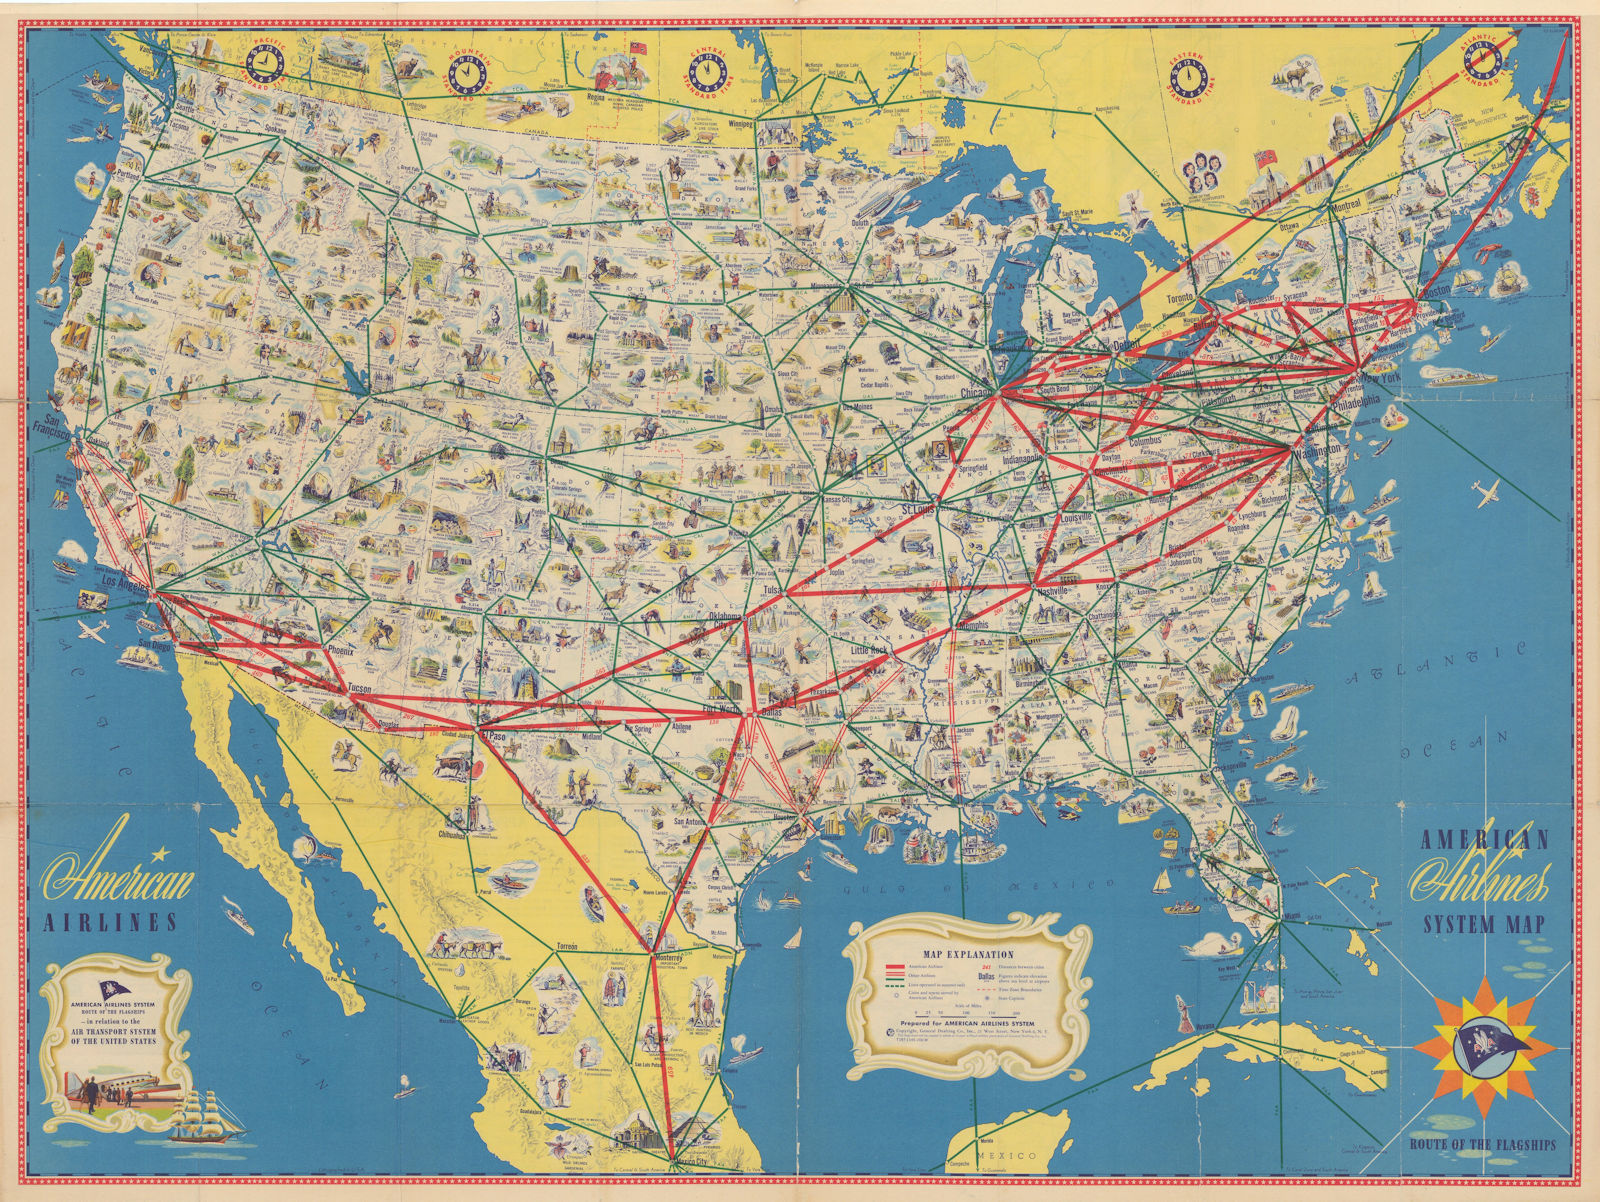 American Airlines System Map. Route of the Flagships. Pictorial 24"x32" c1945